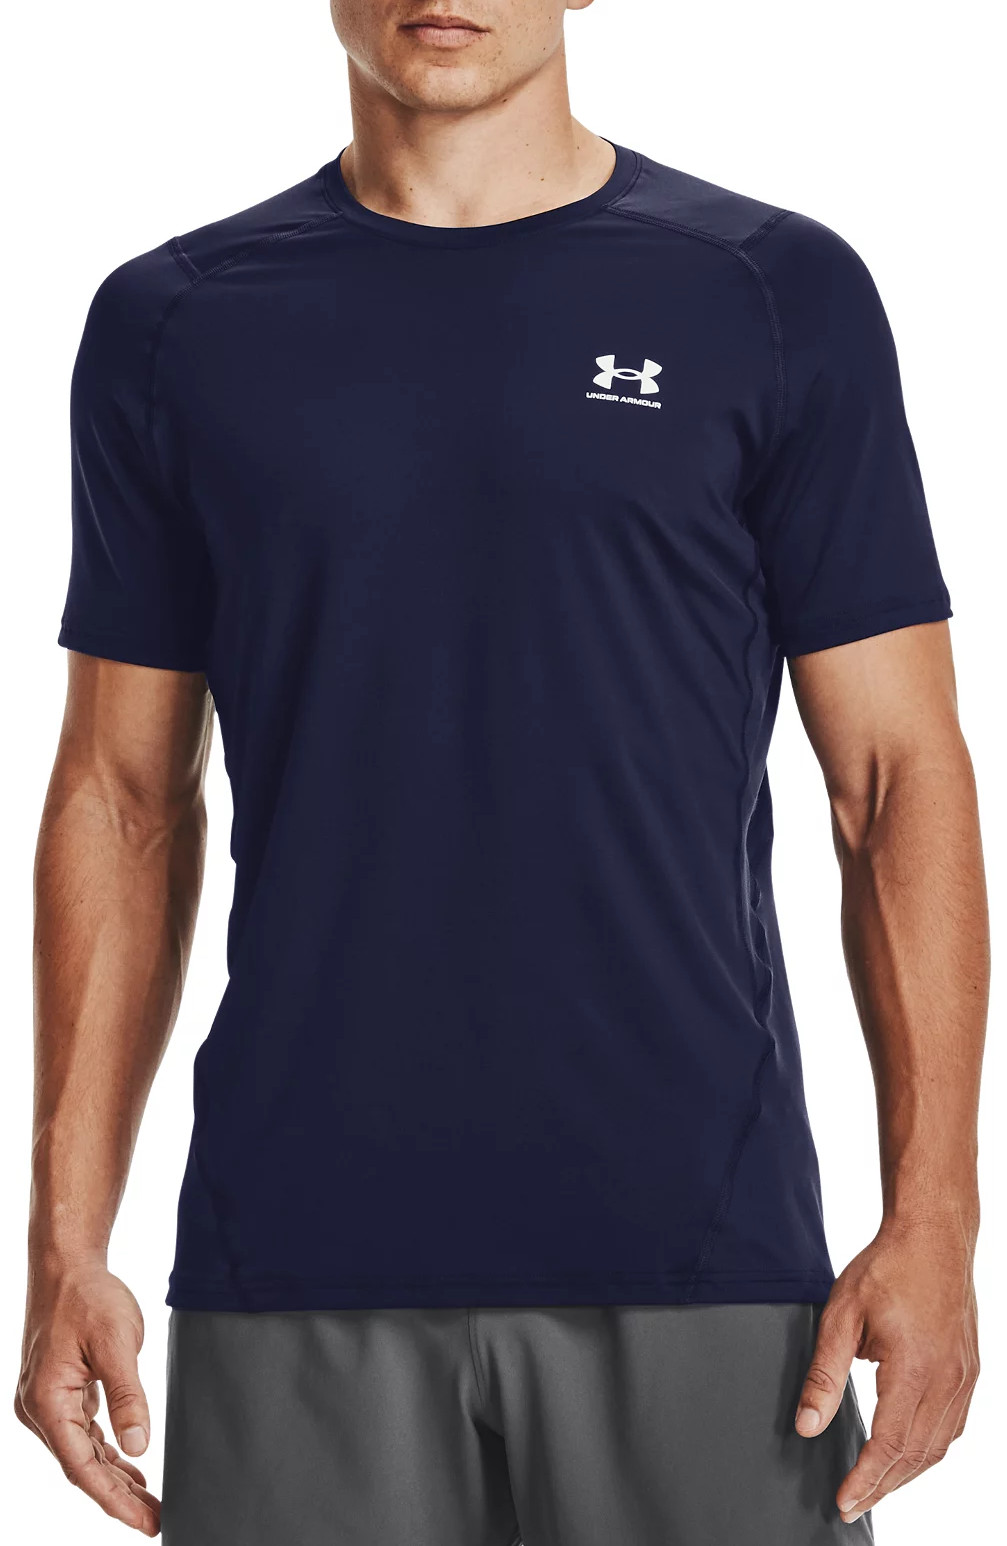 https://i1.t4s.cz/products/1361683-410/under-armour-ua-hg-armour-fitted-ss-tee-328995-1361683-410.jpg